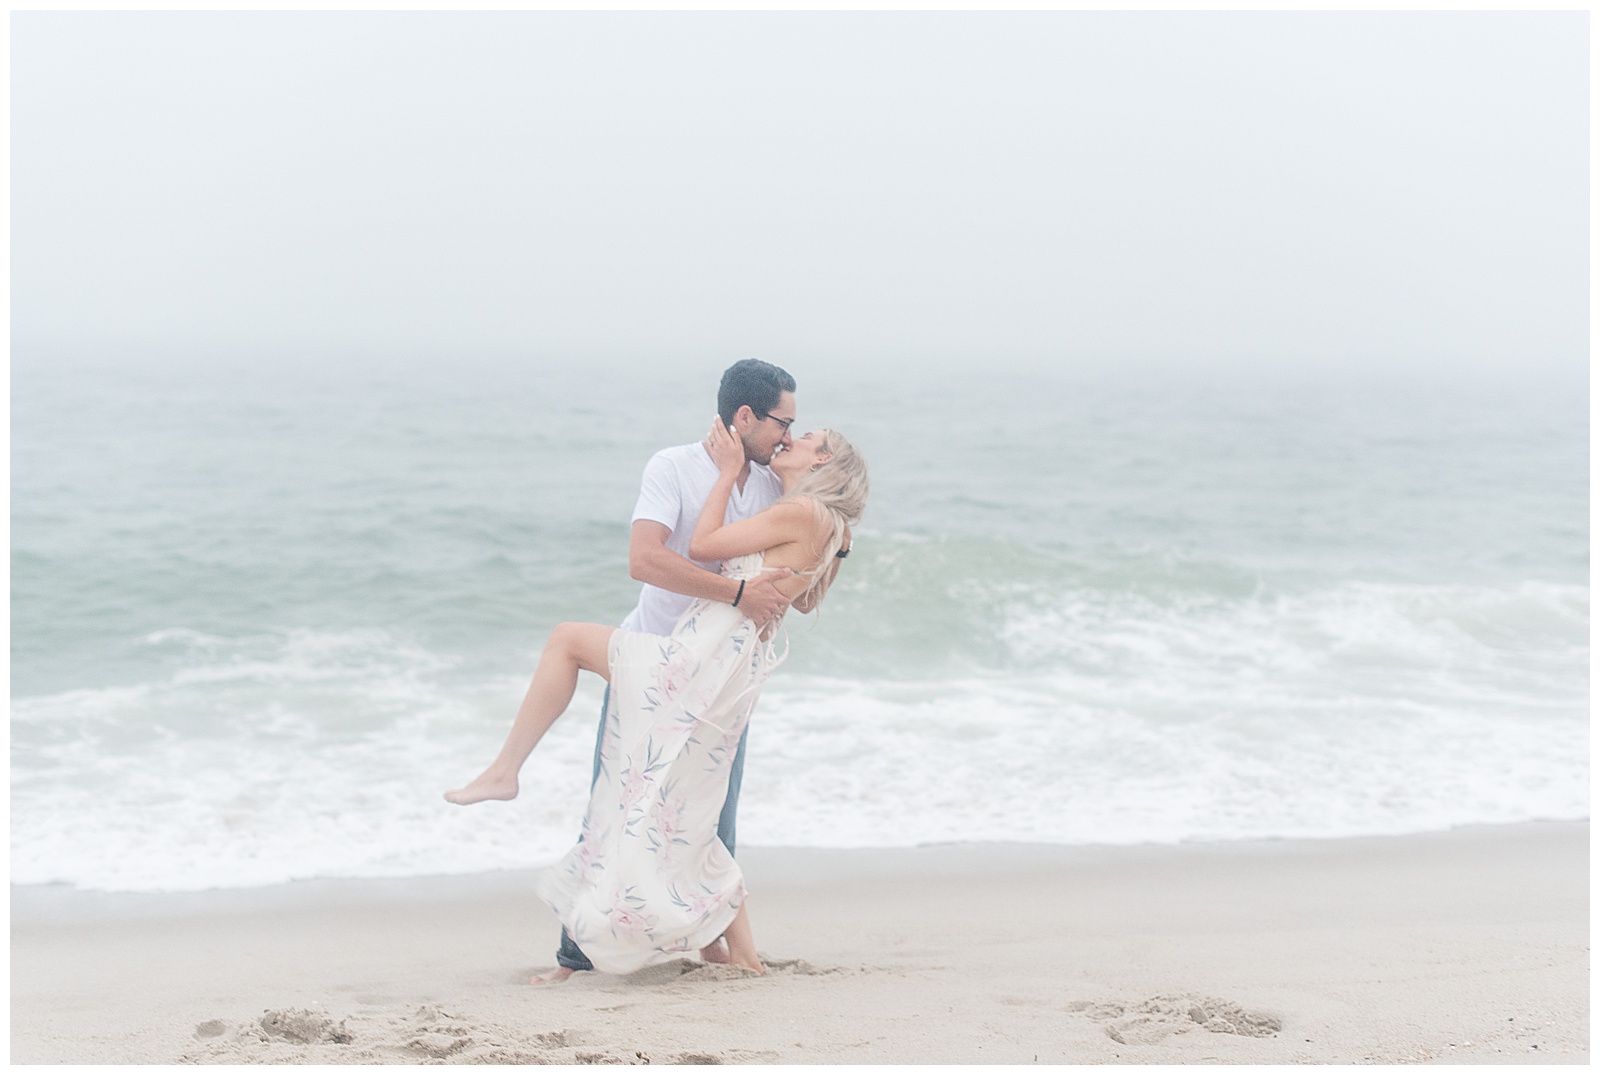 standing along the ocean guy holds girl and dips her back kissing her in bayhead new jersey